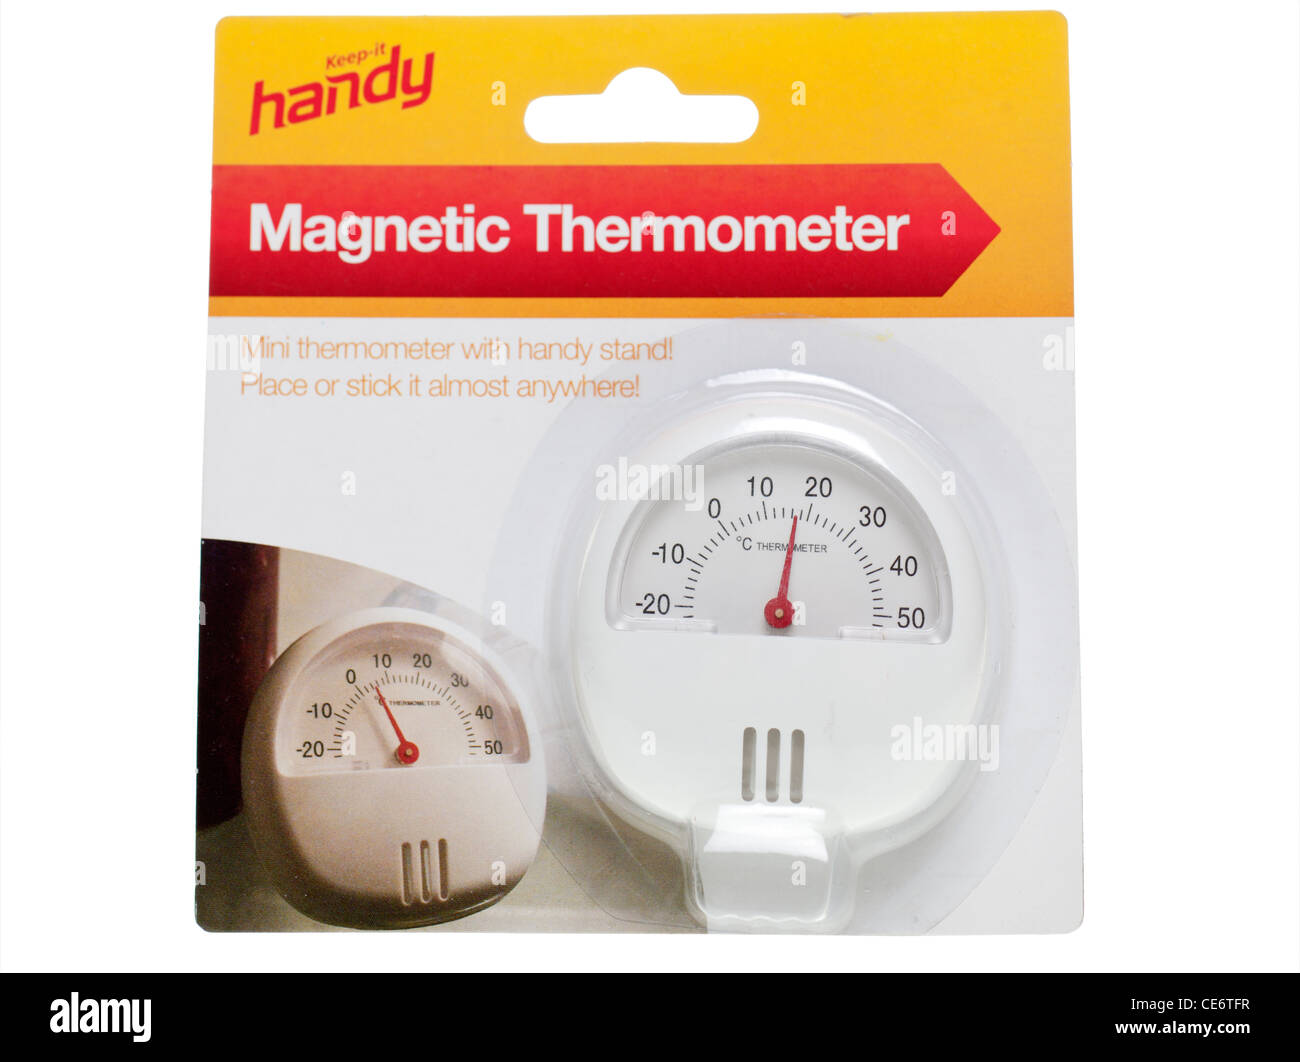 Handy magnetic thermometer Stock Photo